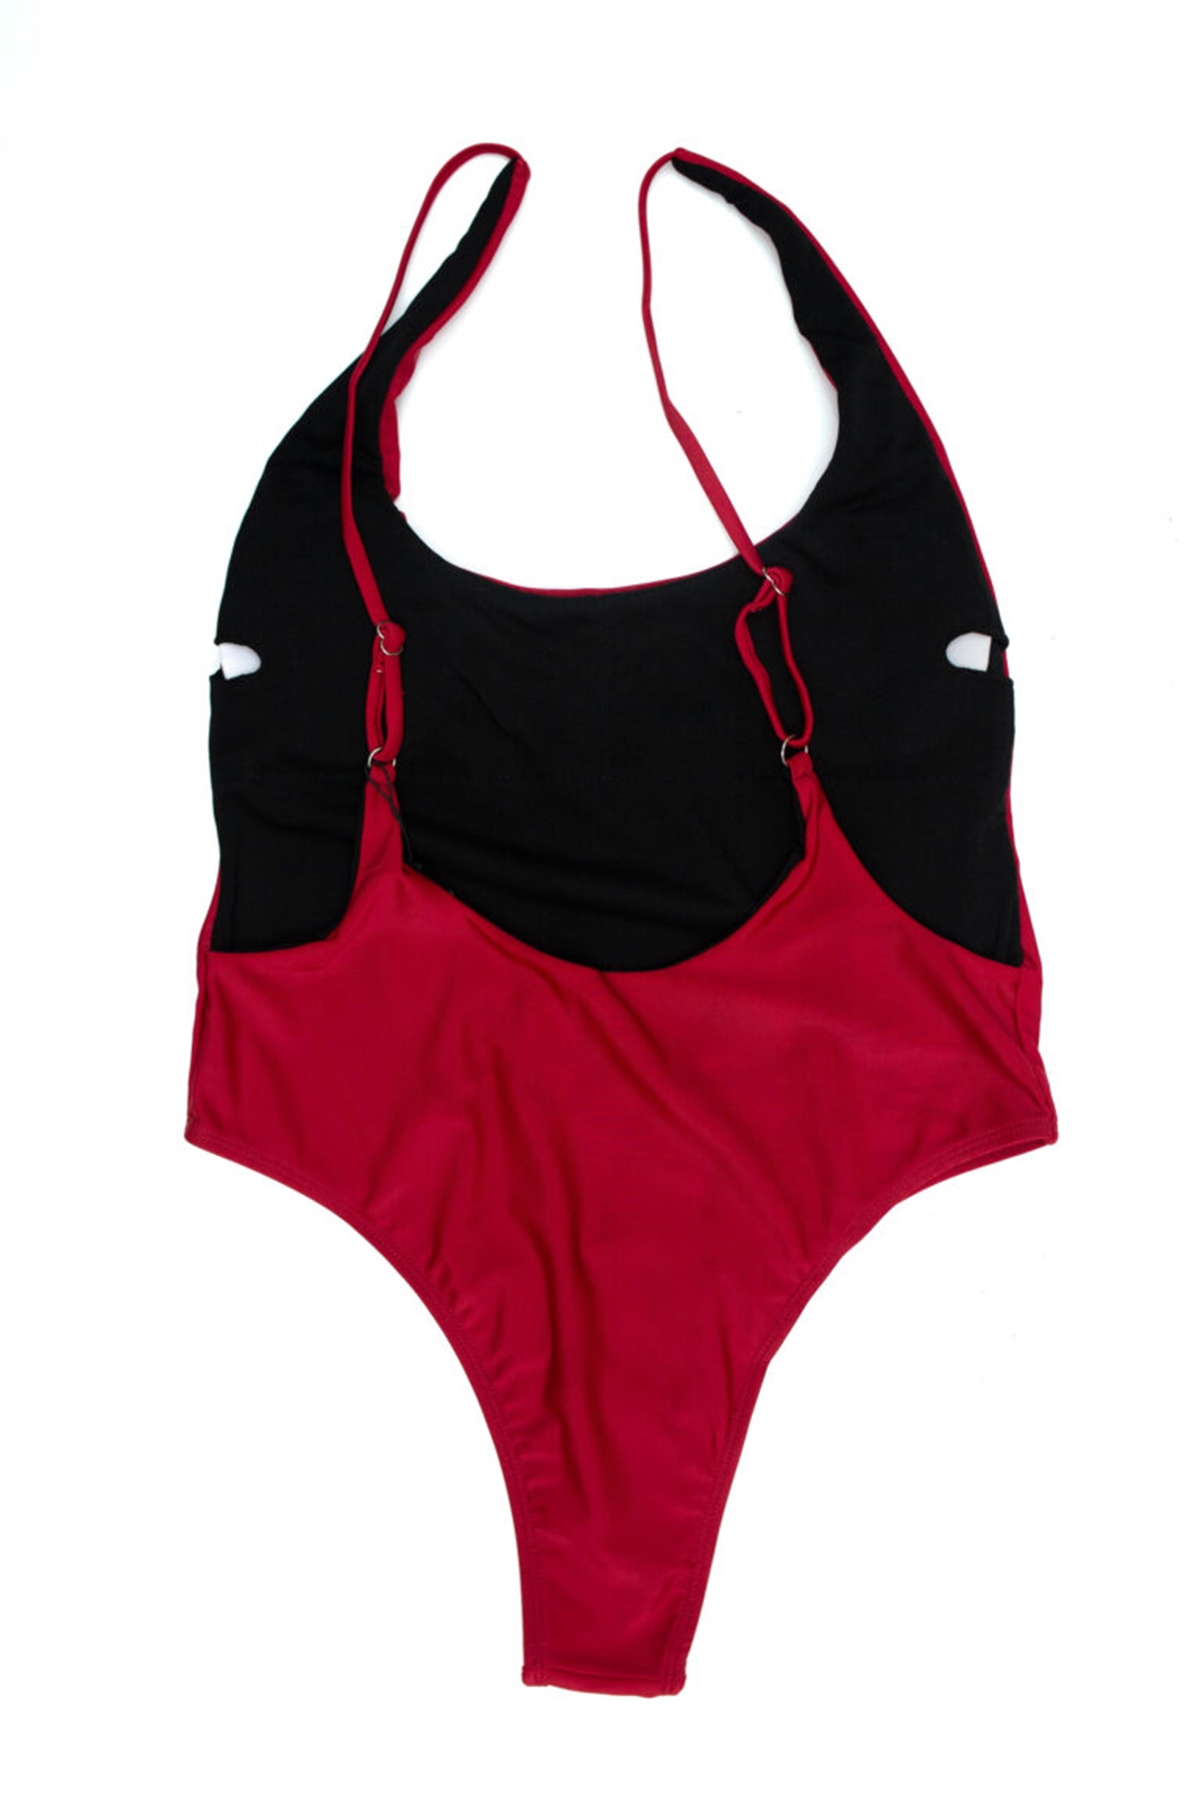 Time-Out-X-One-Piece-Bikini-Swimsuit—Red—Back